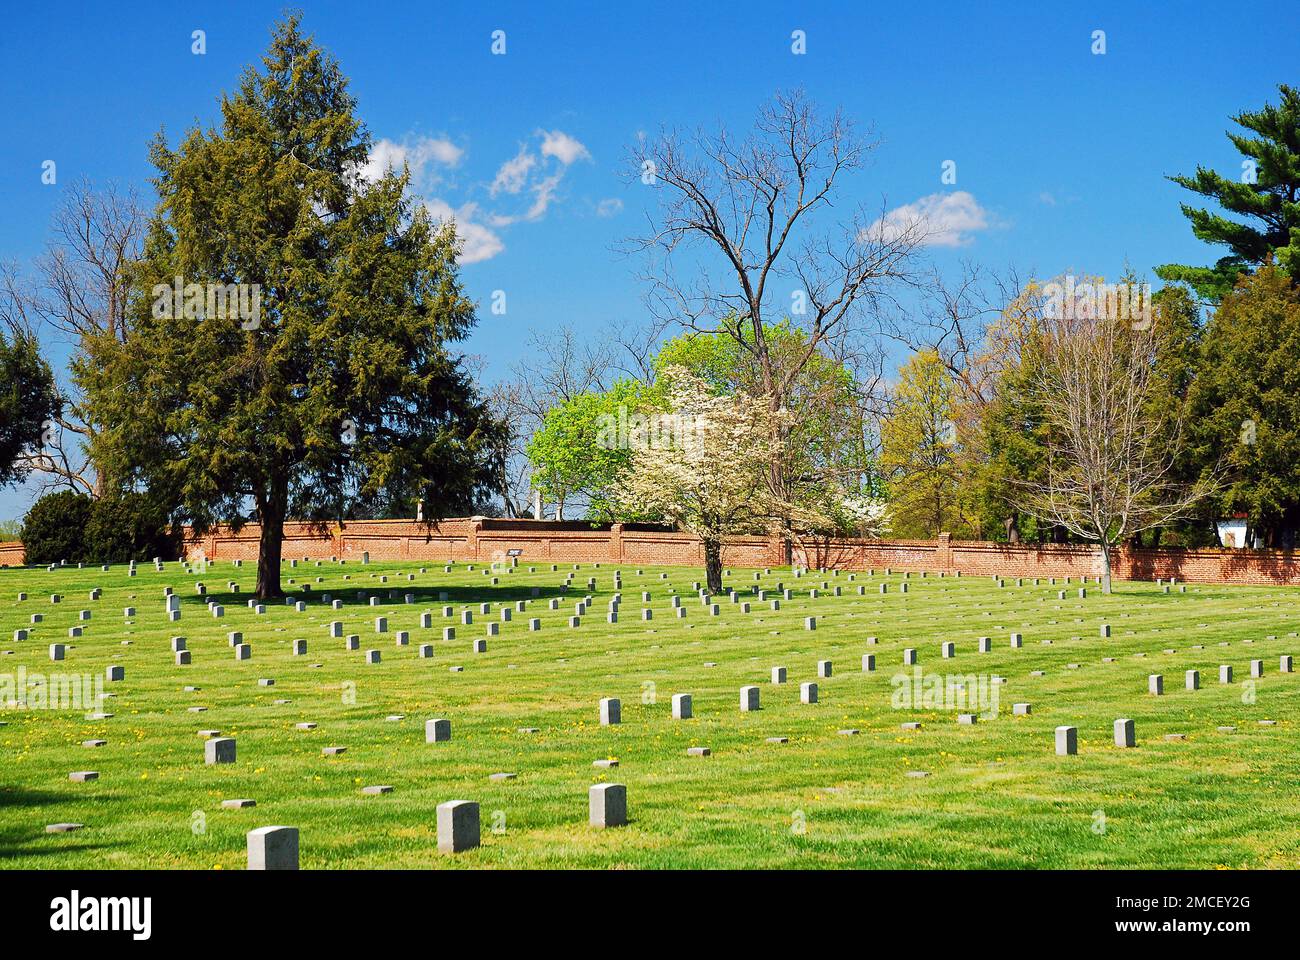 Graves mark the burial spots of thousands of Union and Confederate soldiers at Fredericksburg National Battlefield in Virginia Stock Photo